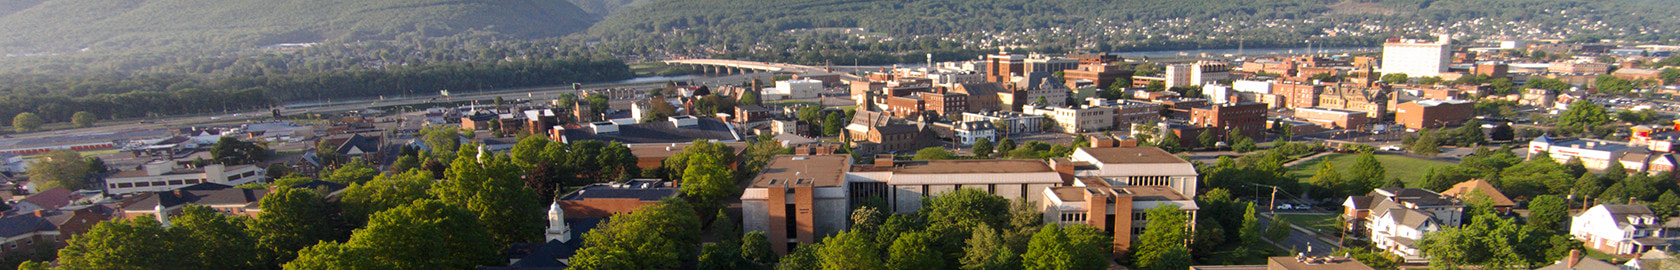 Aerial view of campus with Williamsport, the Susquehanna River and Bald Eagle Mountain as a backdrop